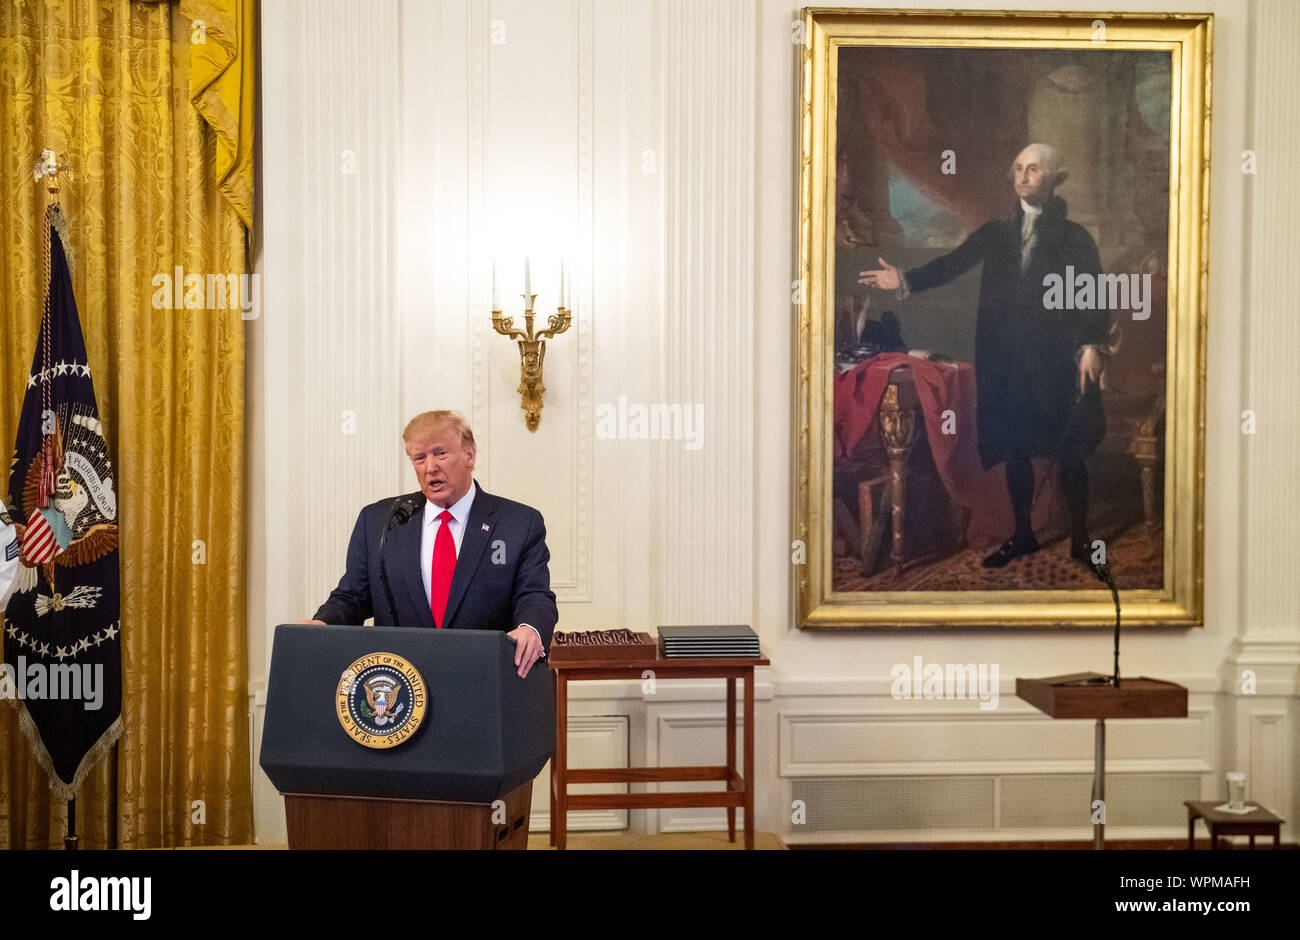 Washington, United States. 09th Sep, 2019. President Donald Trump delivers remarks before awarding the Public Safety Officer Medal of Valor and Heroic Commendations, during a ceremony in the East Room at the White House in Washington, DC on Monday, September 9, 2019. Trump recognized the six Dayton police officers who stoped a mass shooting on August 4th and honored 5 civilians who helped during a mass shooting at a Walmart in El Paso the day before. Photo by Kevin Dietsch/UPI Credit: UPI/Alamy Live News Stock Photo